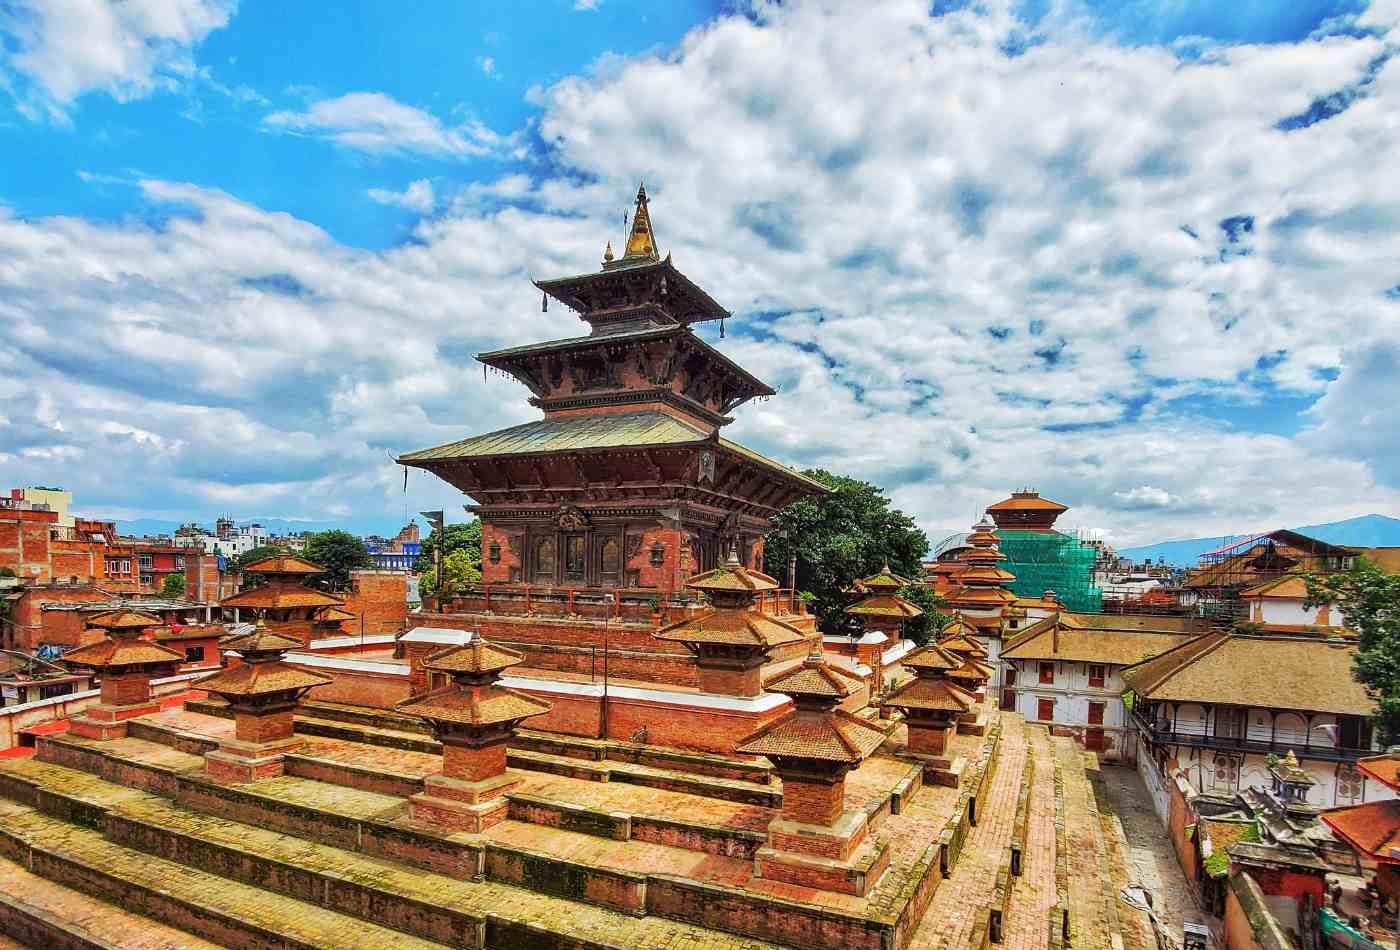 A beautiful view of the Taleju Temple, located in the Kathmandu Durbar Square, with a clear blue sky in the background.